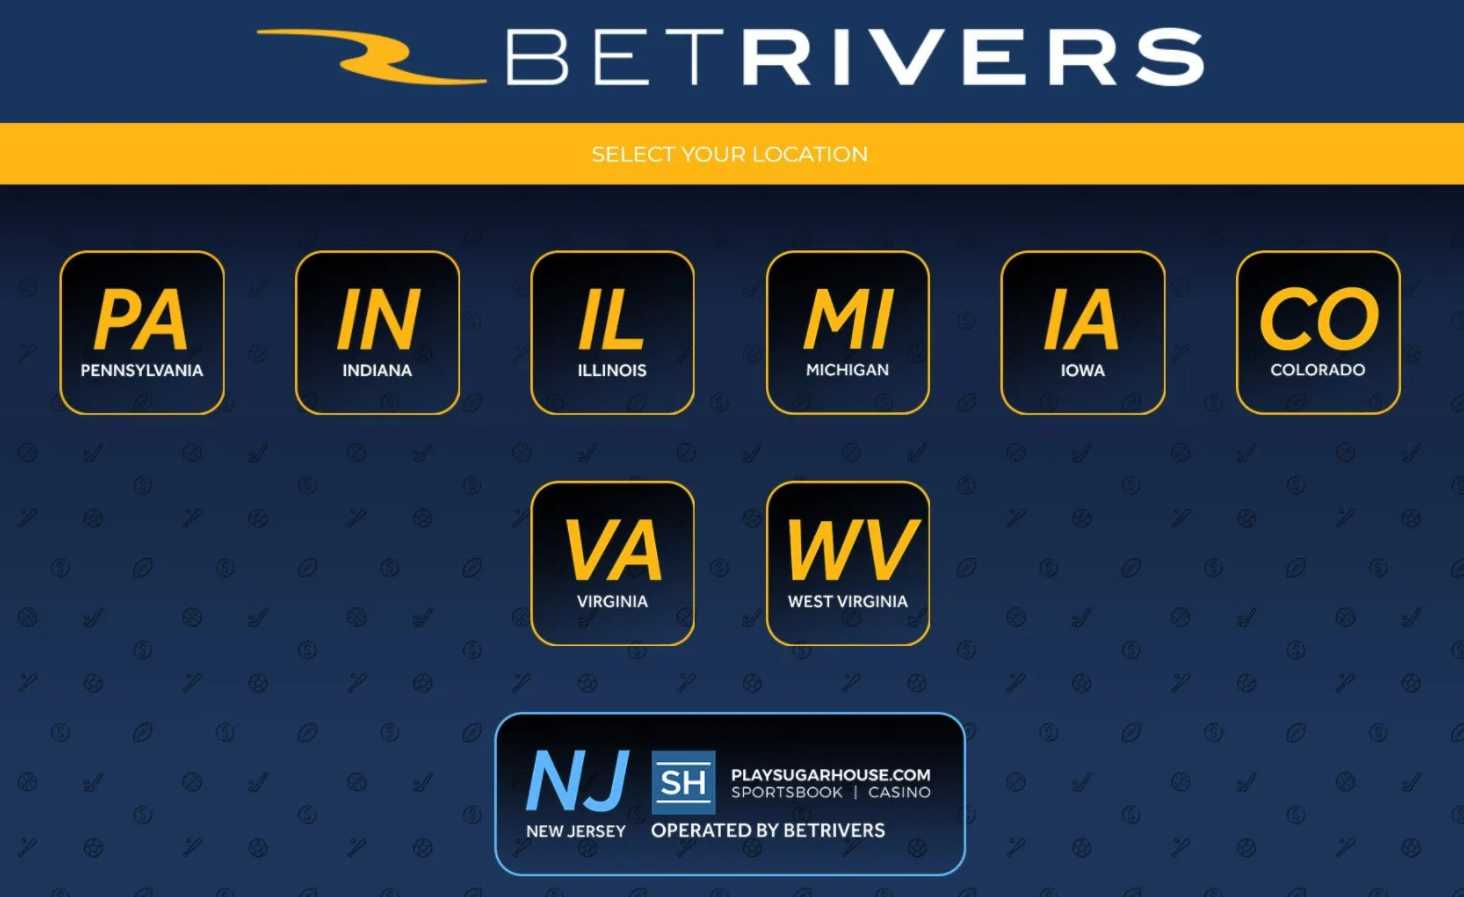 Review of BetRivers sportsbook features in Iowa